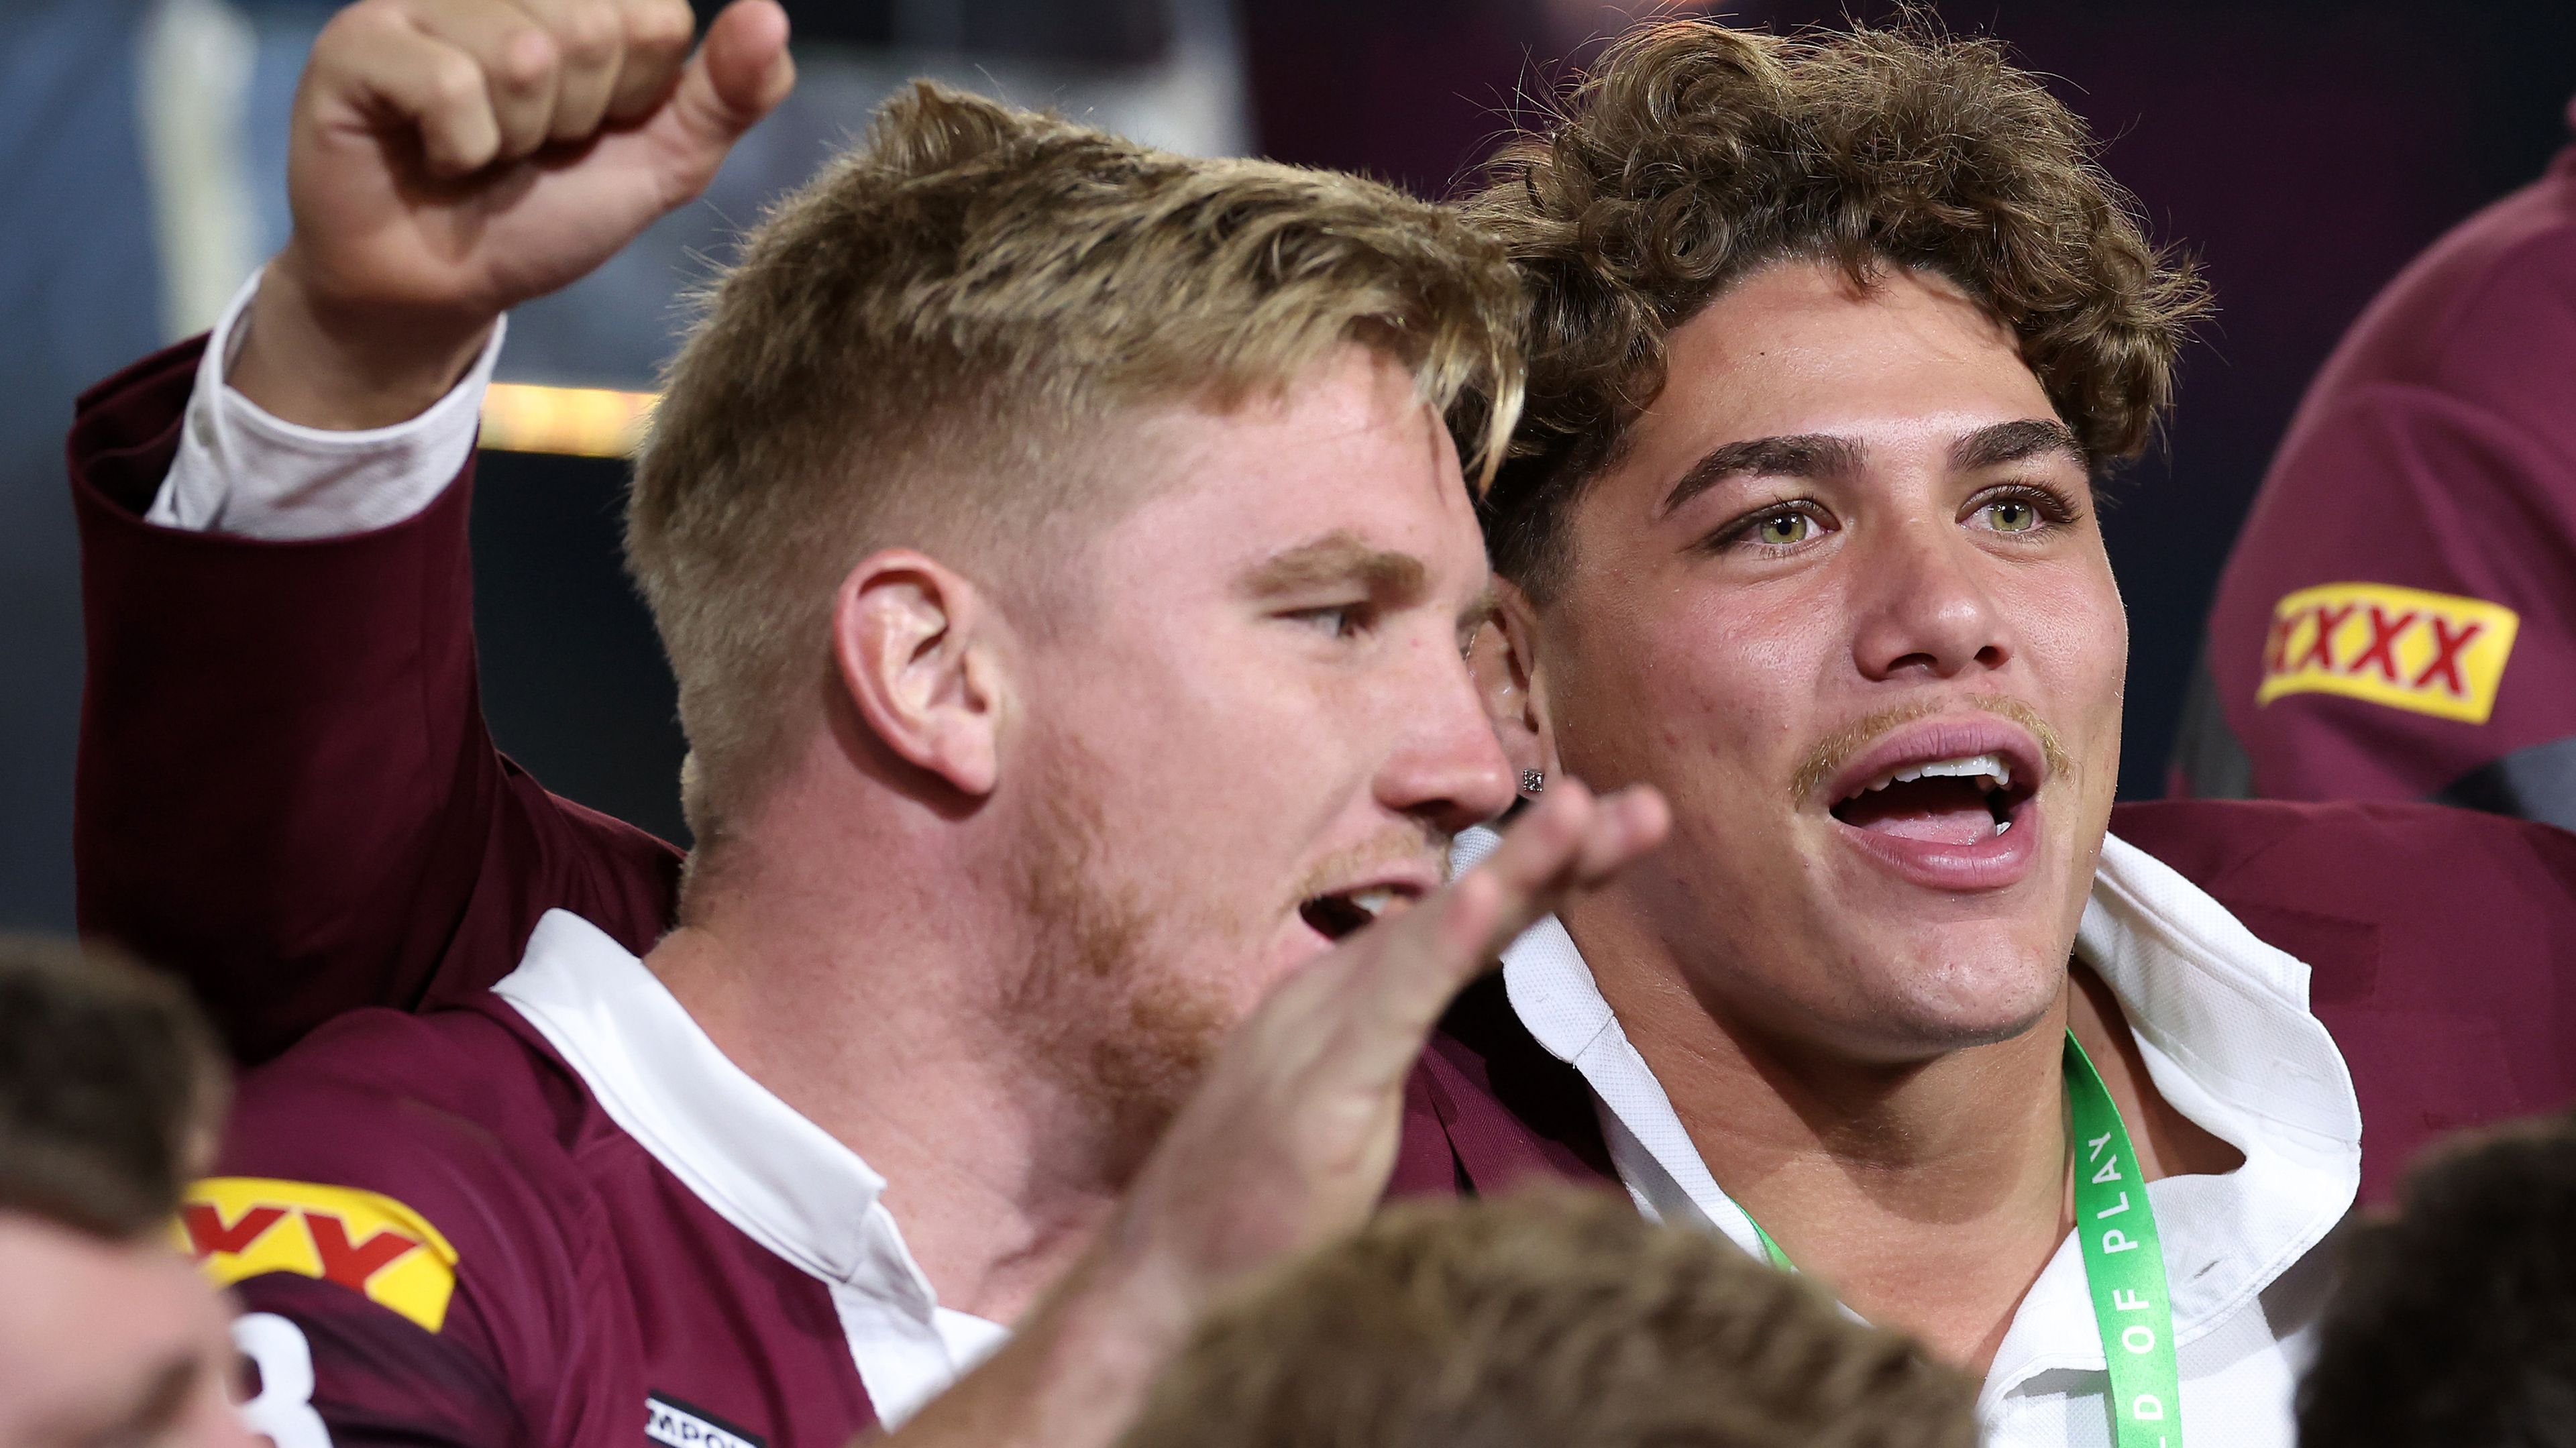 Reece Walsh of the Maroons celebrates with team mates after winning the series 2-1 after game three of the State of Origin series.